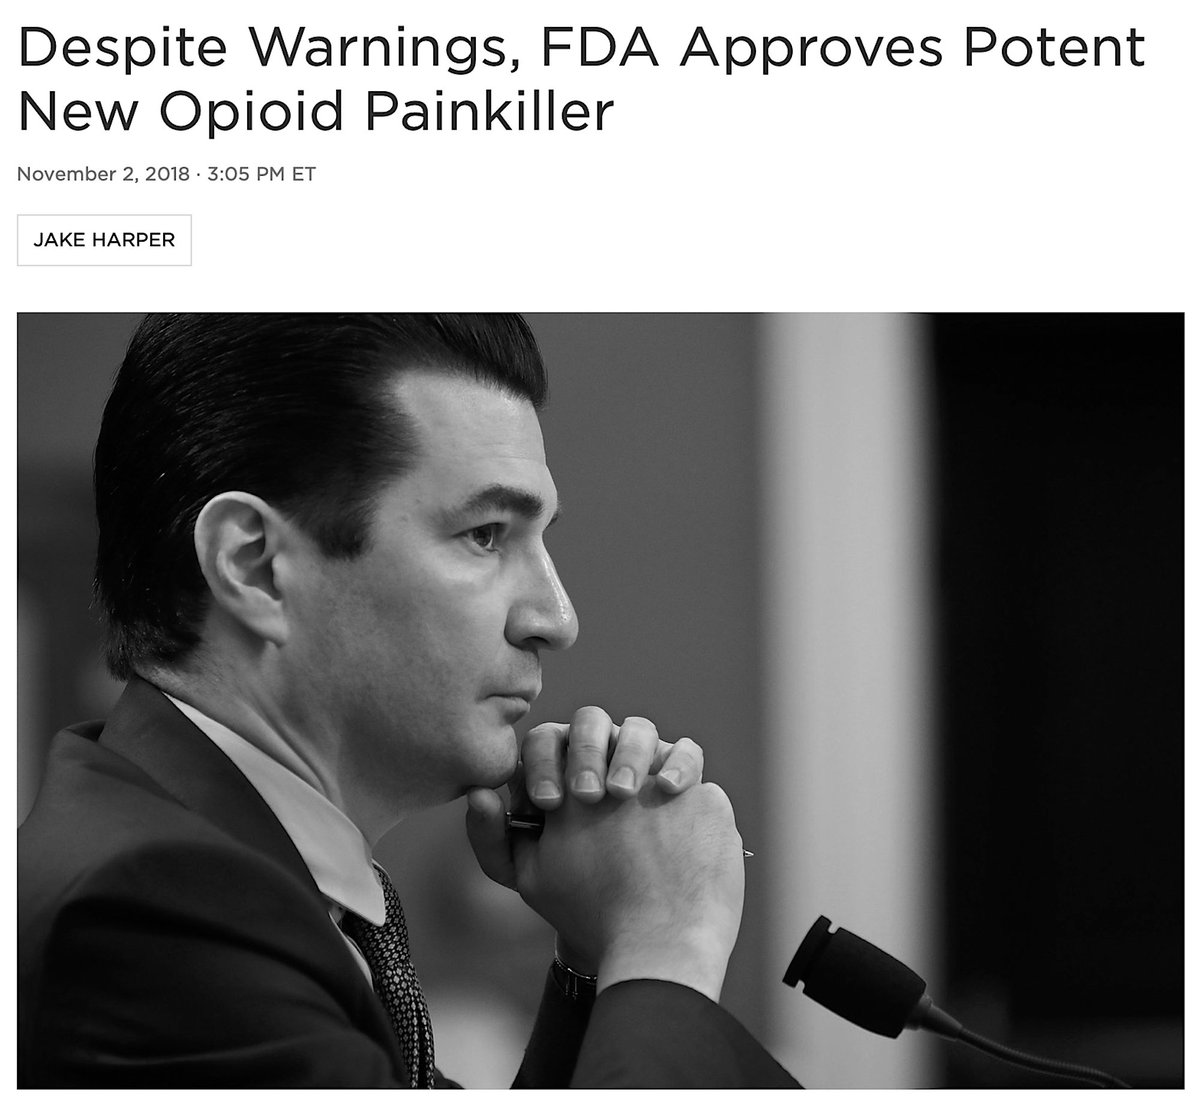 "We've Learned Much From The Harmful Impact That Other Oral Opioid Products Can Have In The Context Of The Opioid Crisis." - Scott Gottlieb, FDA CommissionerNo. You Have Not.NPR, Jake Harper, November 2, 2018 https://www.npr.org/sections/health-shots/2018/11/02/663395669/despite-warnings-fda-approves-potent-new-opioid-painkiller